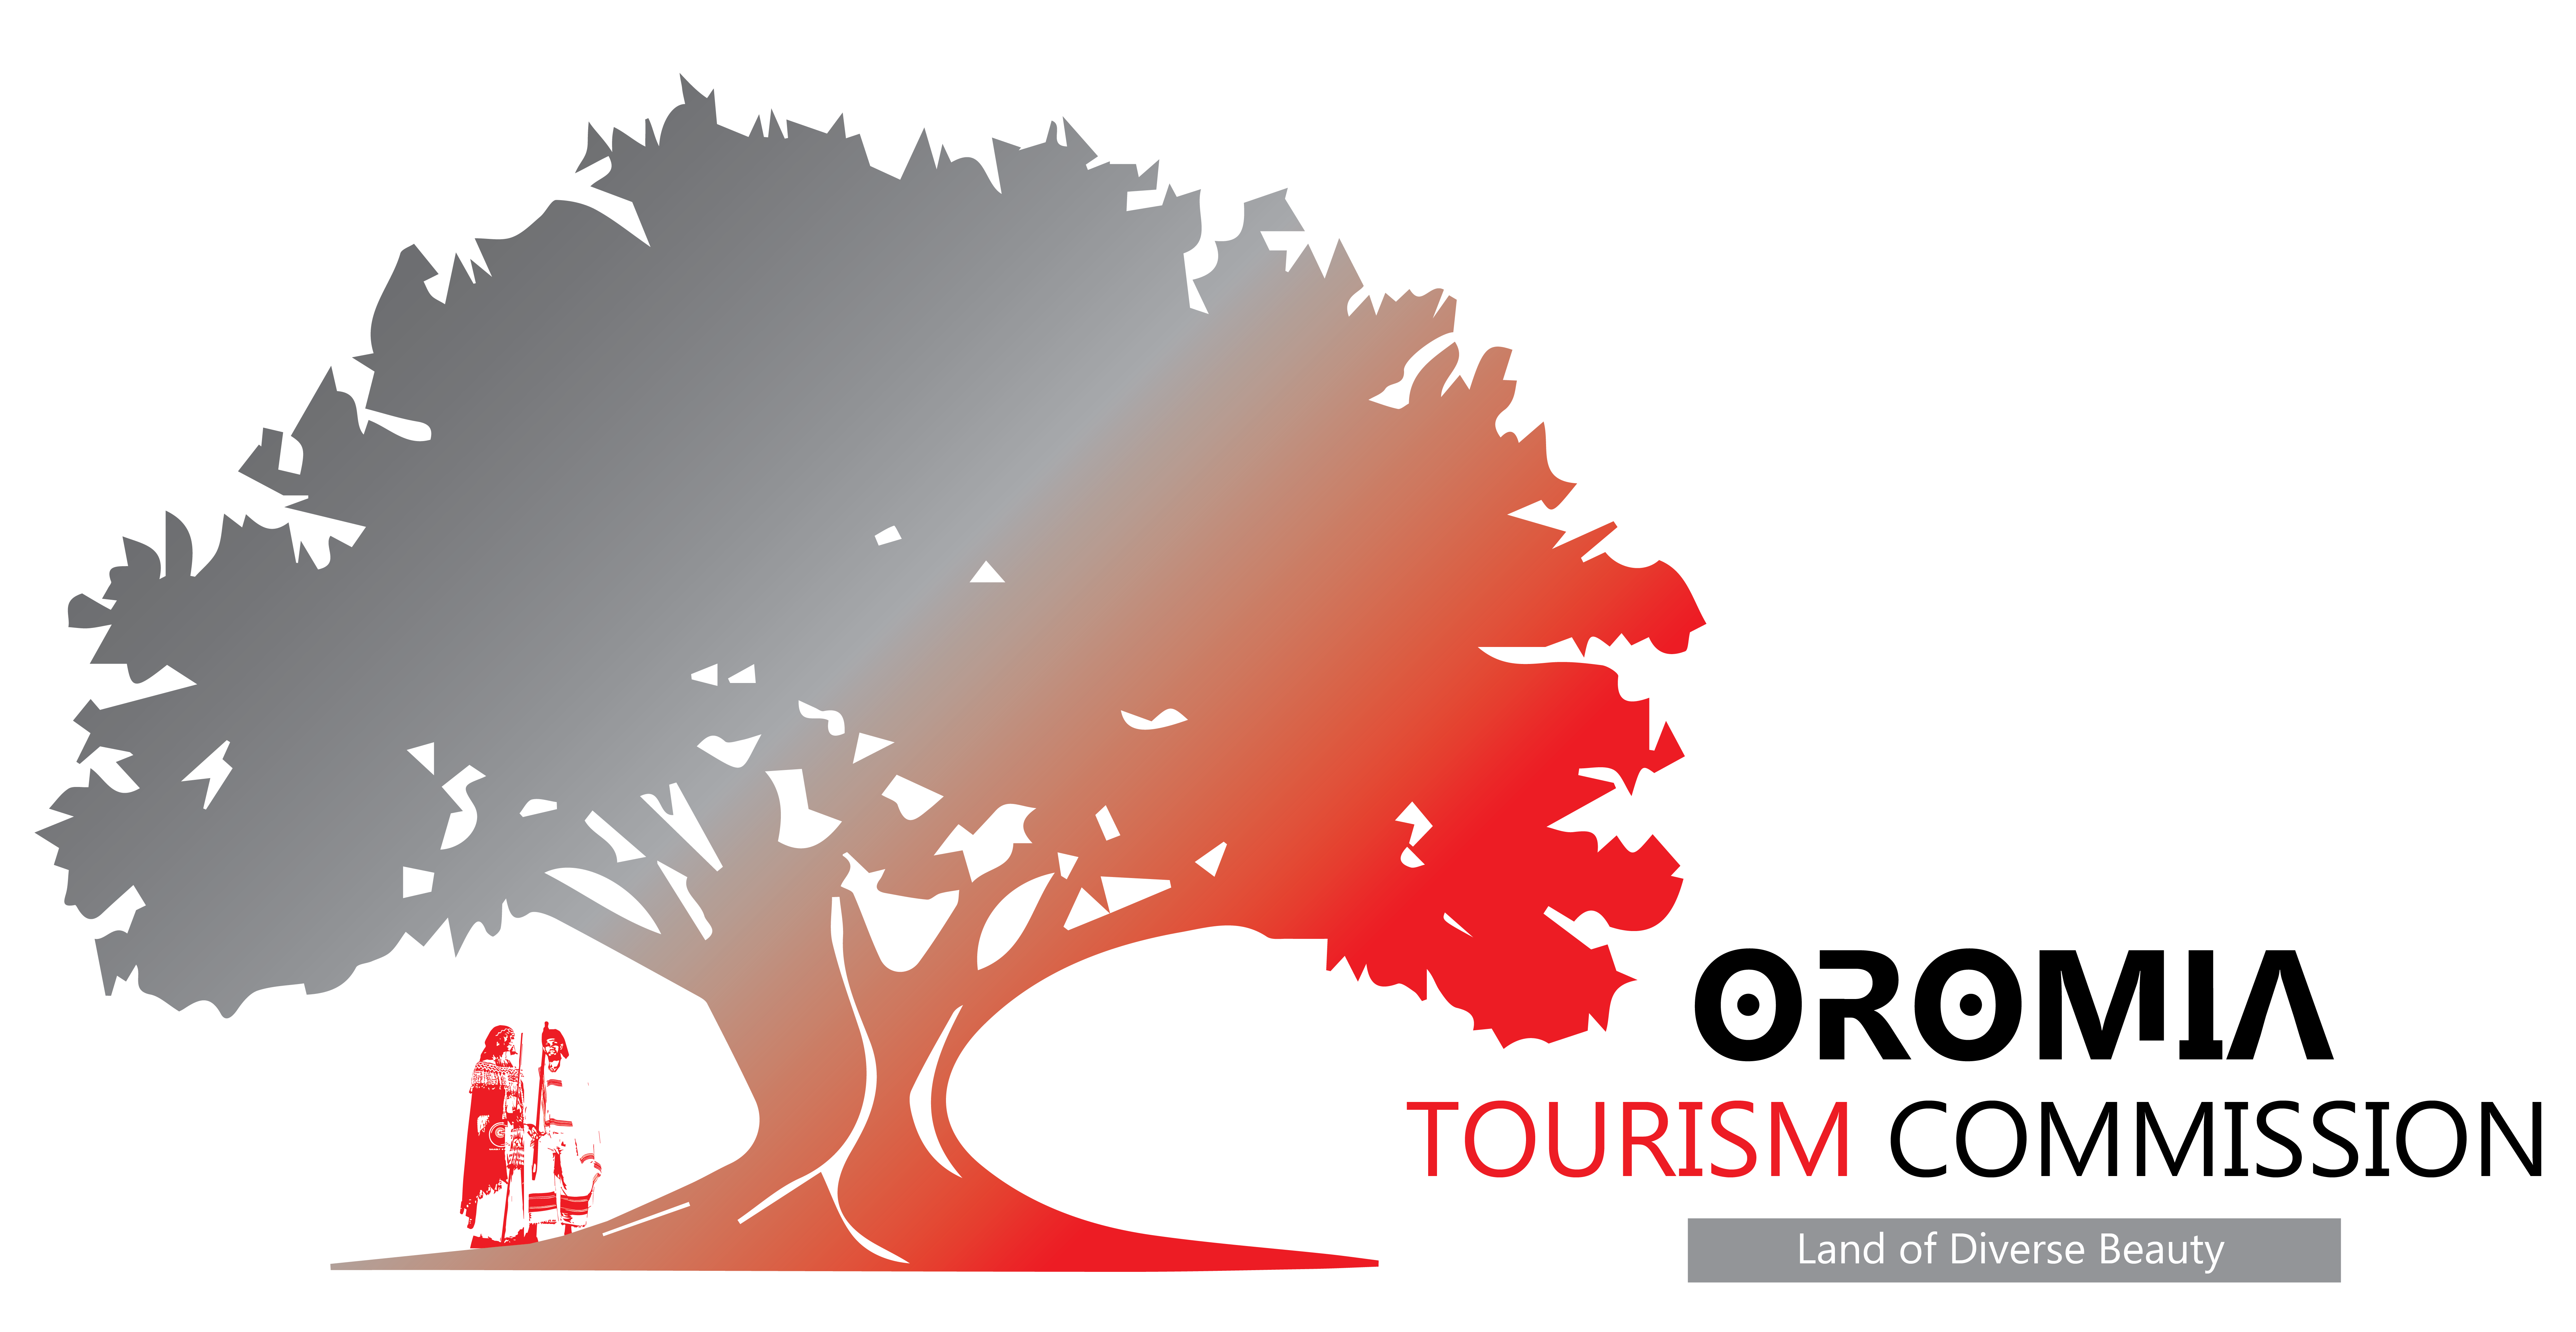 https://oromiatourismcommission.et/wp-content/uploads/2018/08/Travelicious-logo-footer.png